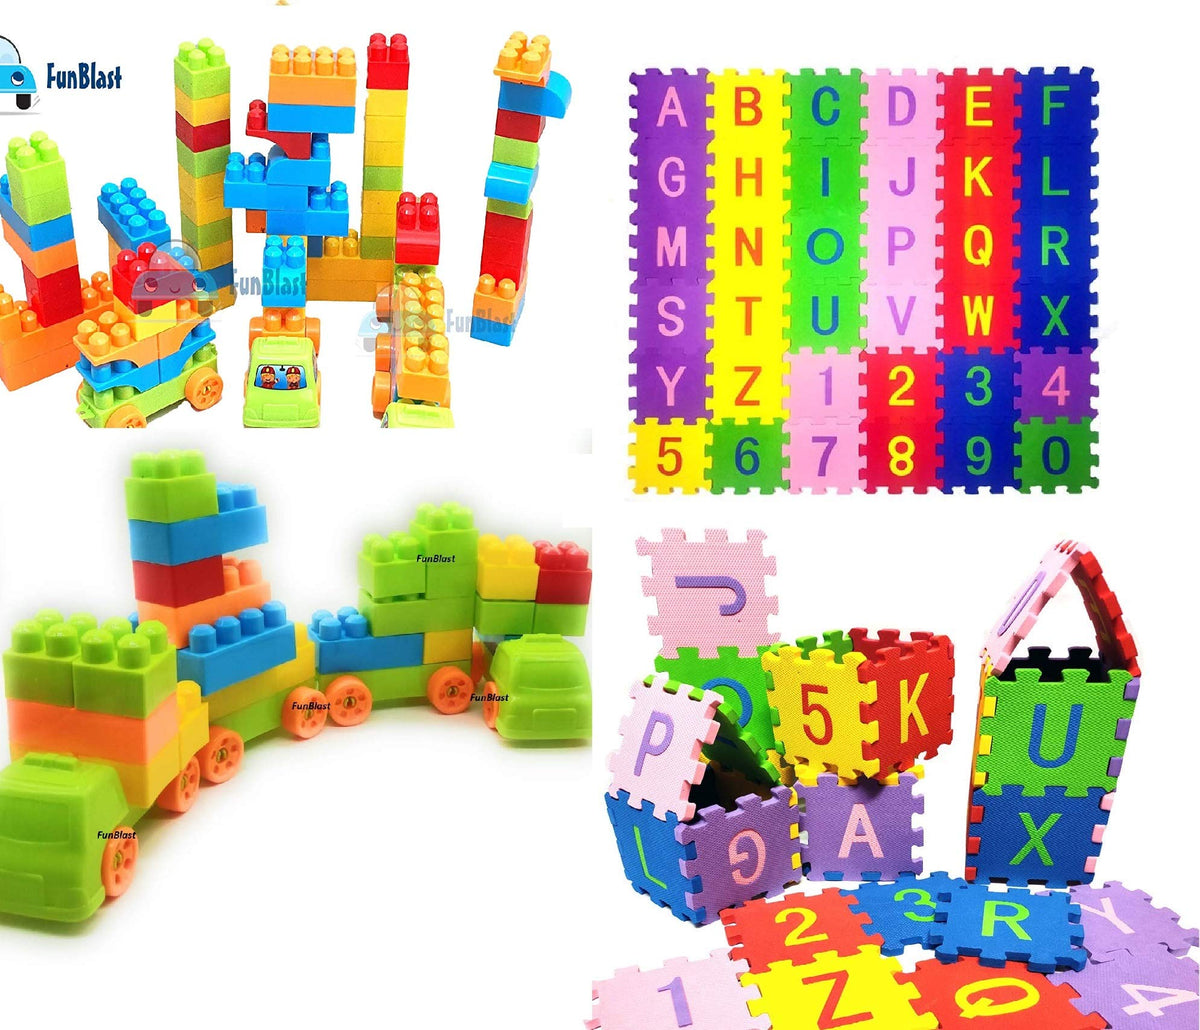 FunBlast 50 Pcs Building Block Toy With 36 Alphabet&Number Puzzle Mat For Kids|Educational Learning Toys For Kids,Boys,Girls,Children,Multi